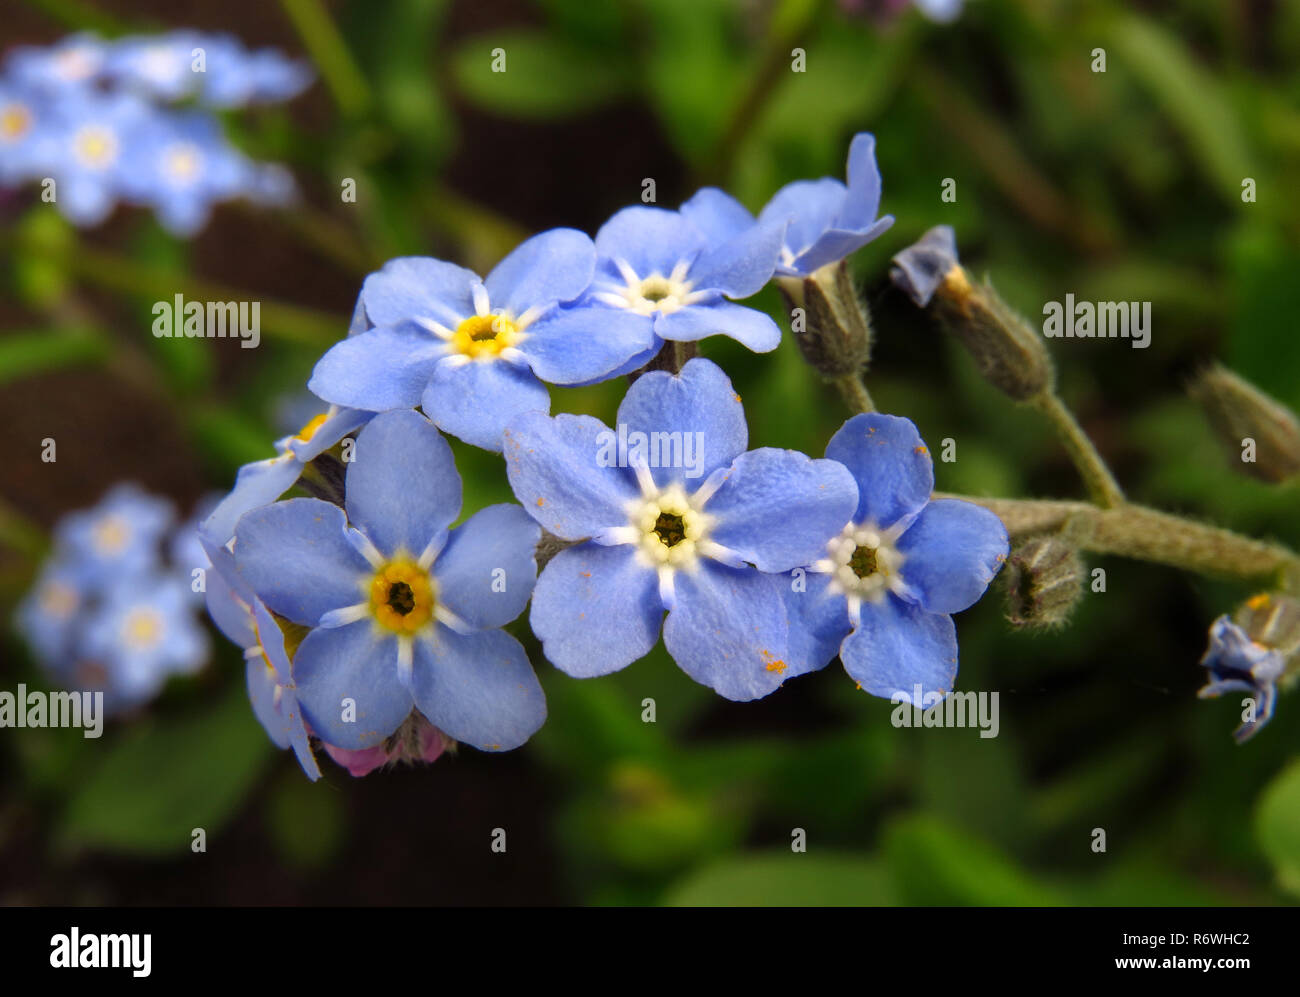 forget-me-not,myosotis spec.,blue flowers in close-up Stock Photo